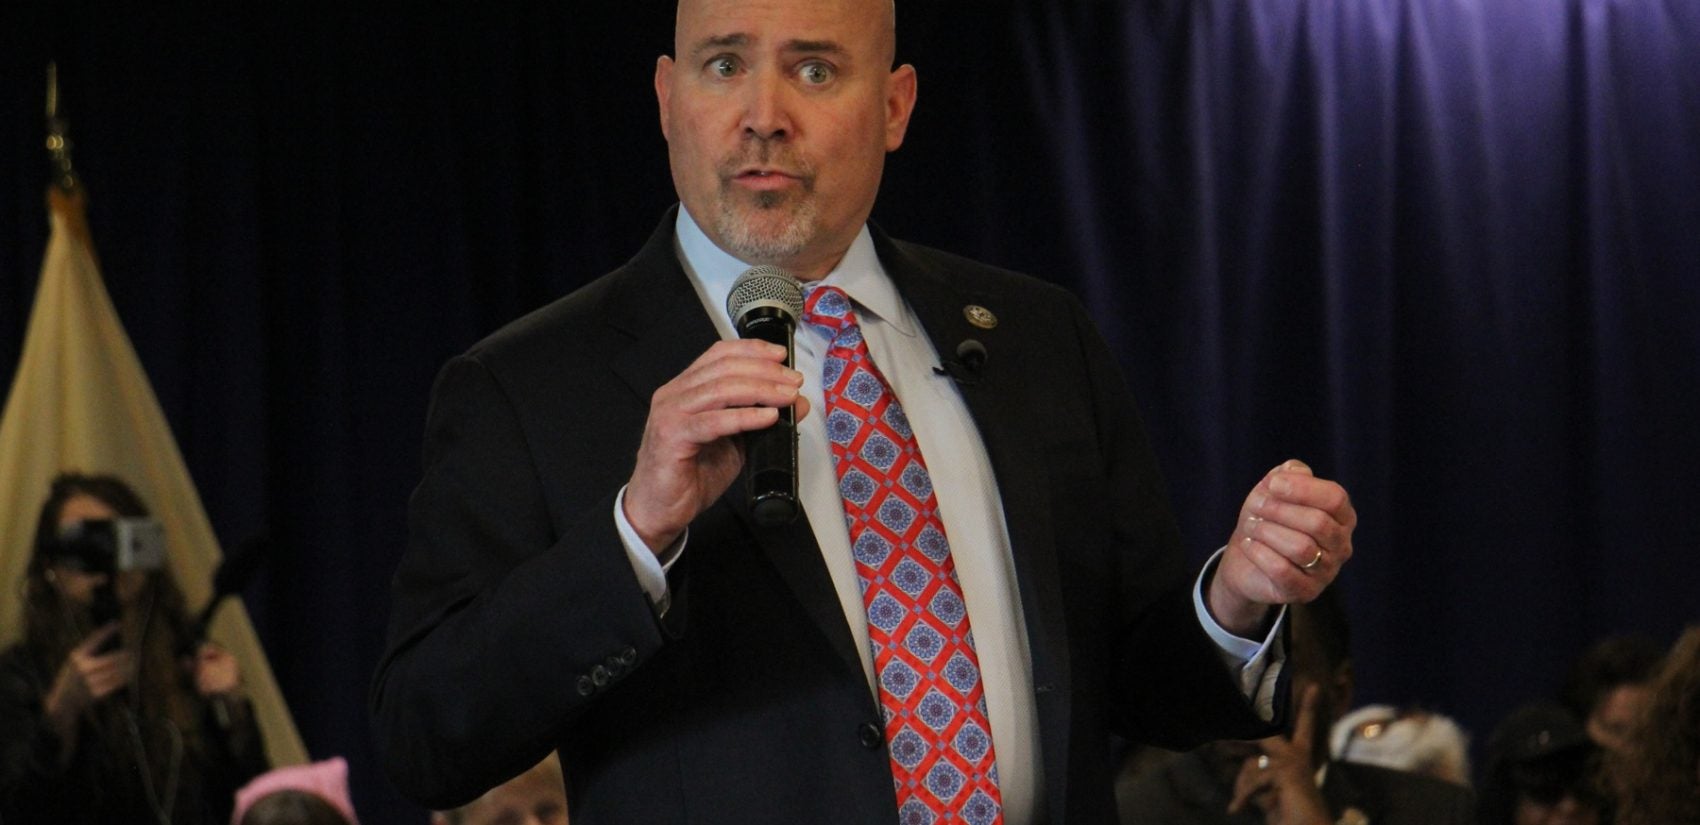 South Jersey Republican U.S. Rep. Tom MacArthur at a town hall in Willingboro, May 10, 2017. (Emma Lee/WHYY)